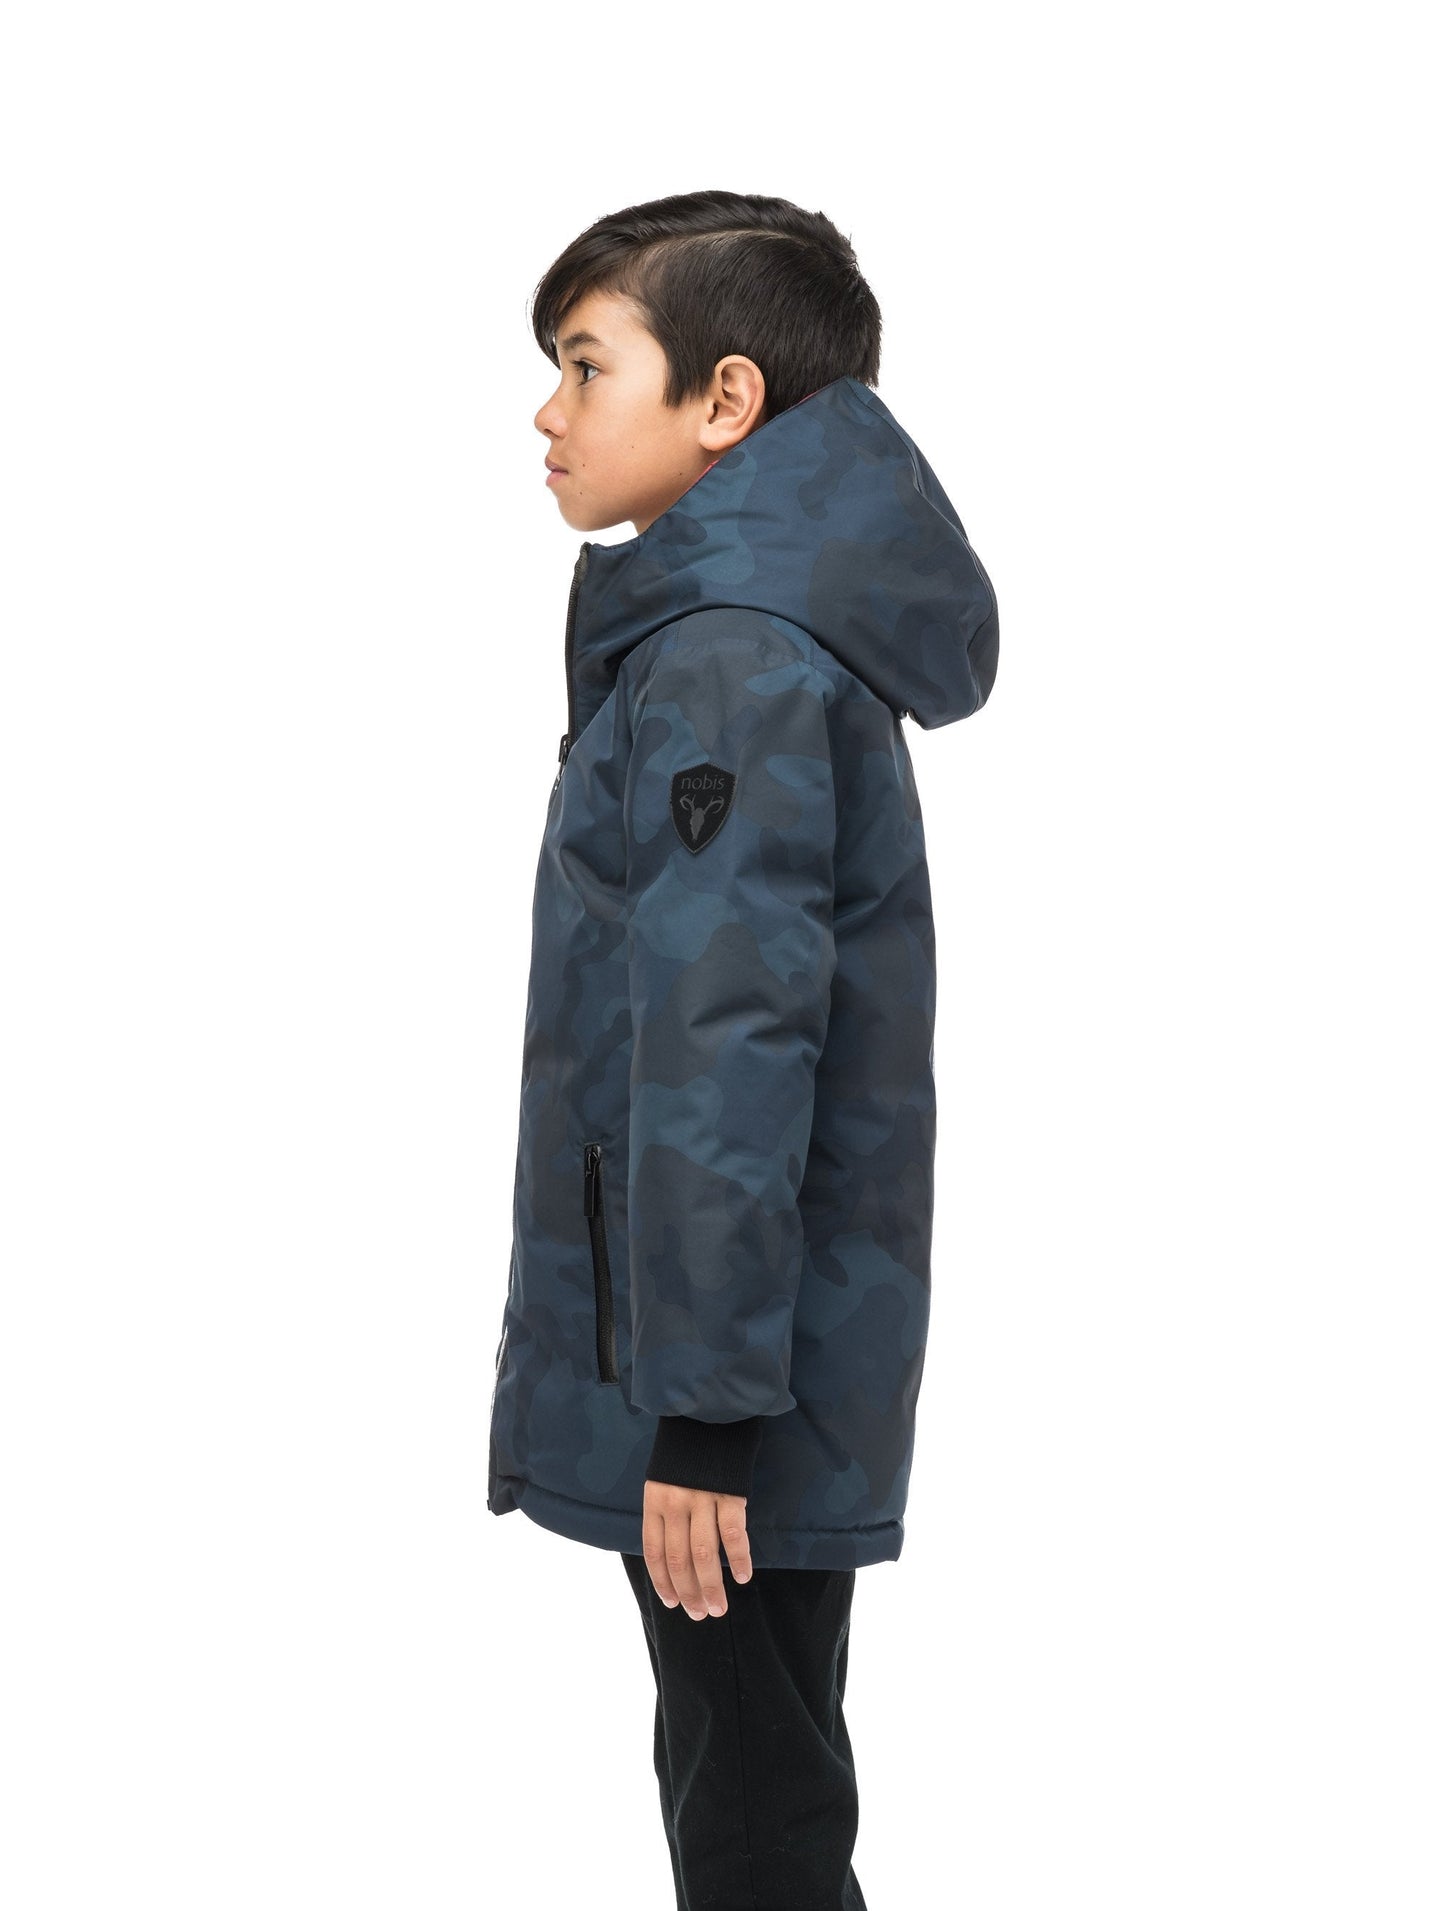 Kids' reversible knee length, down filled parka with waterproof finish in Navy Camo/Vermillion